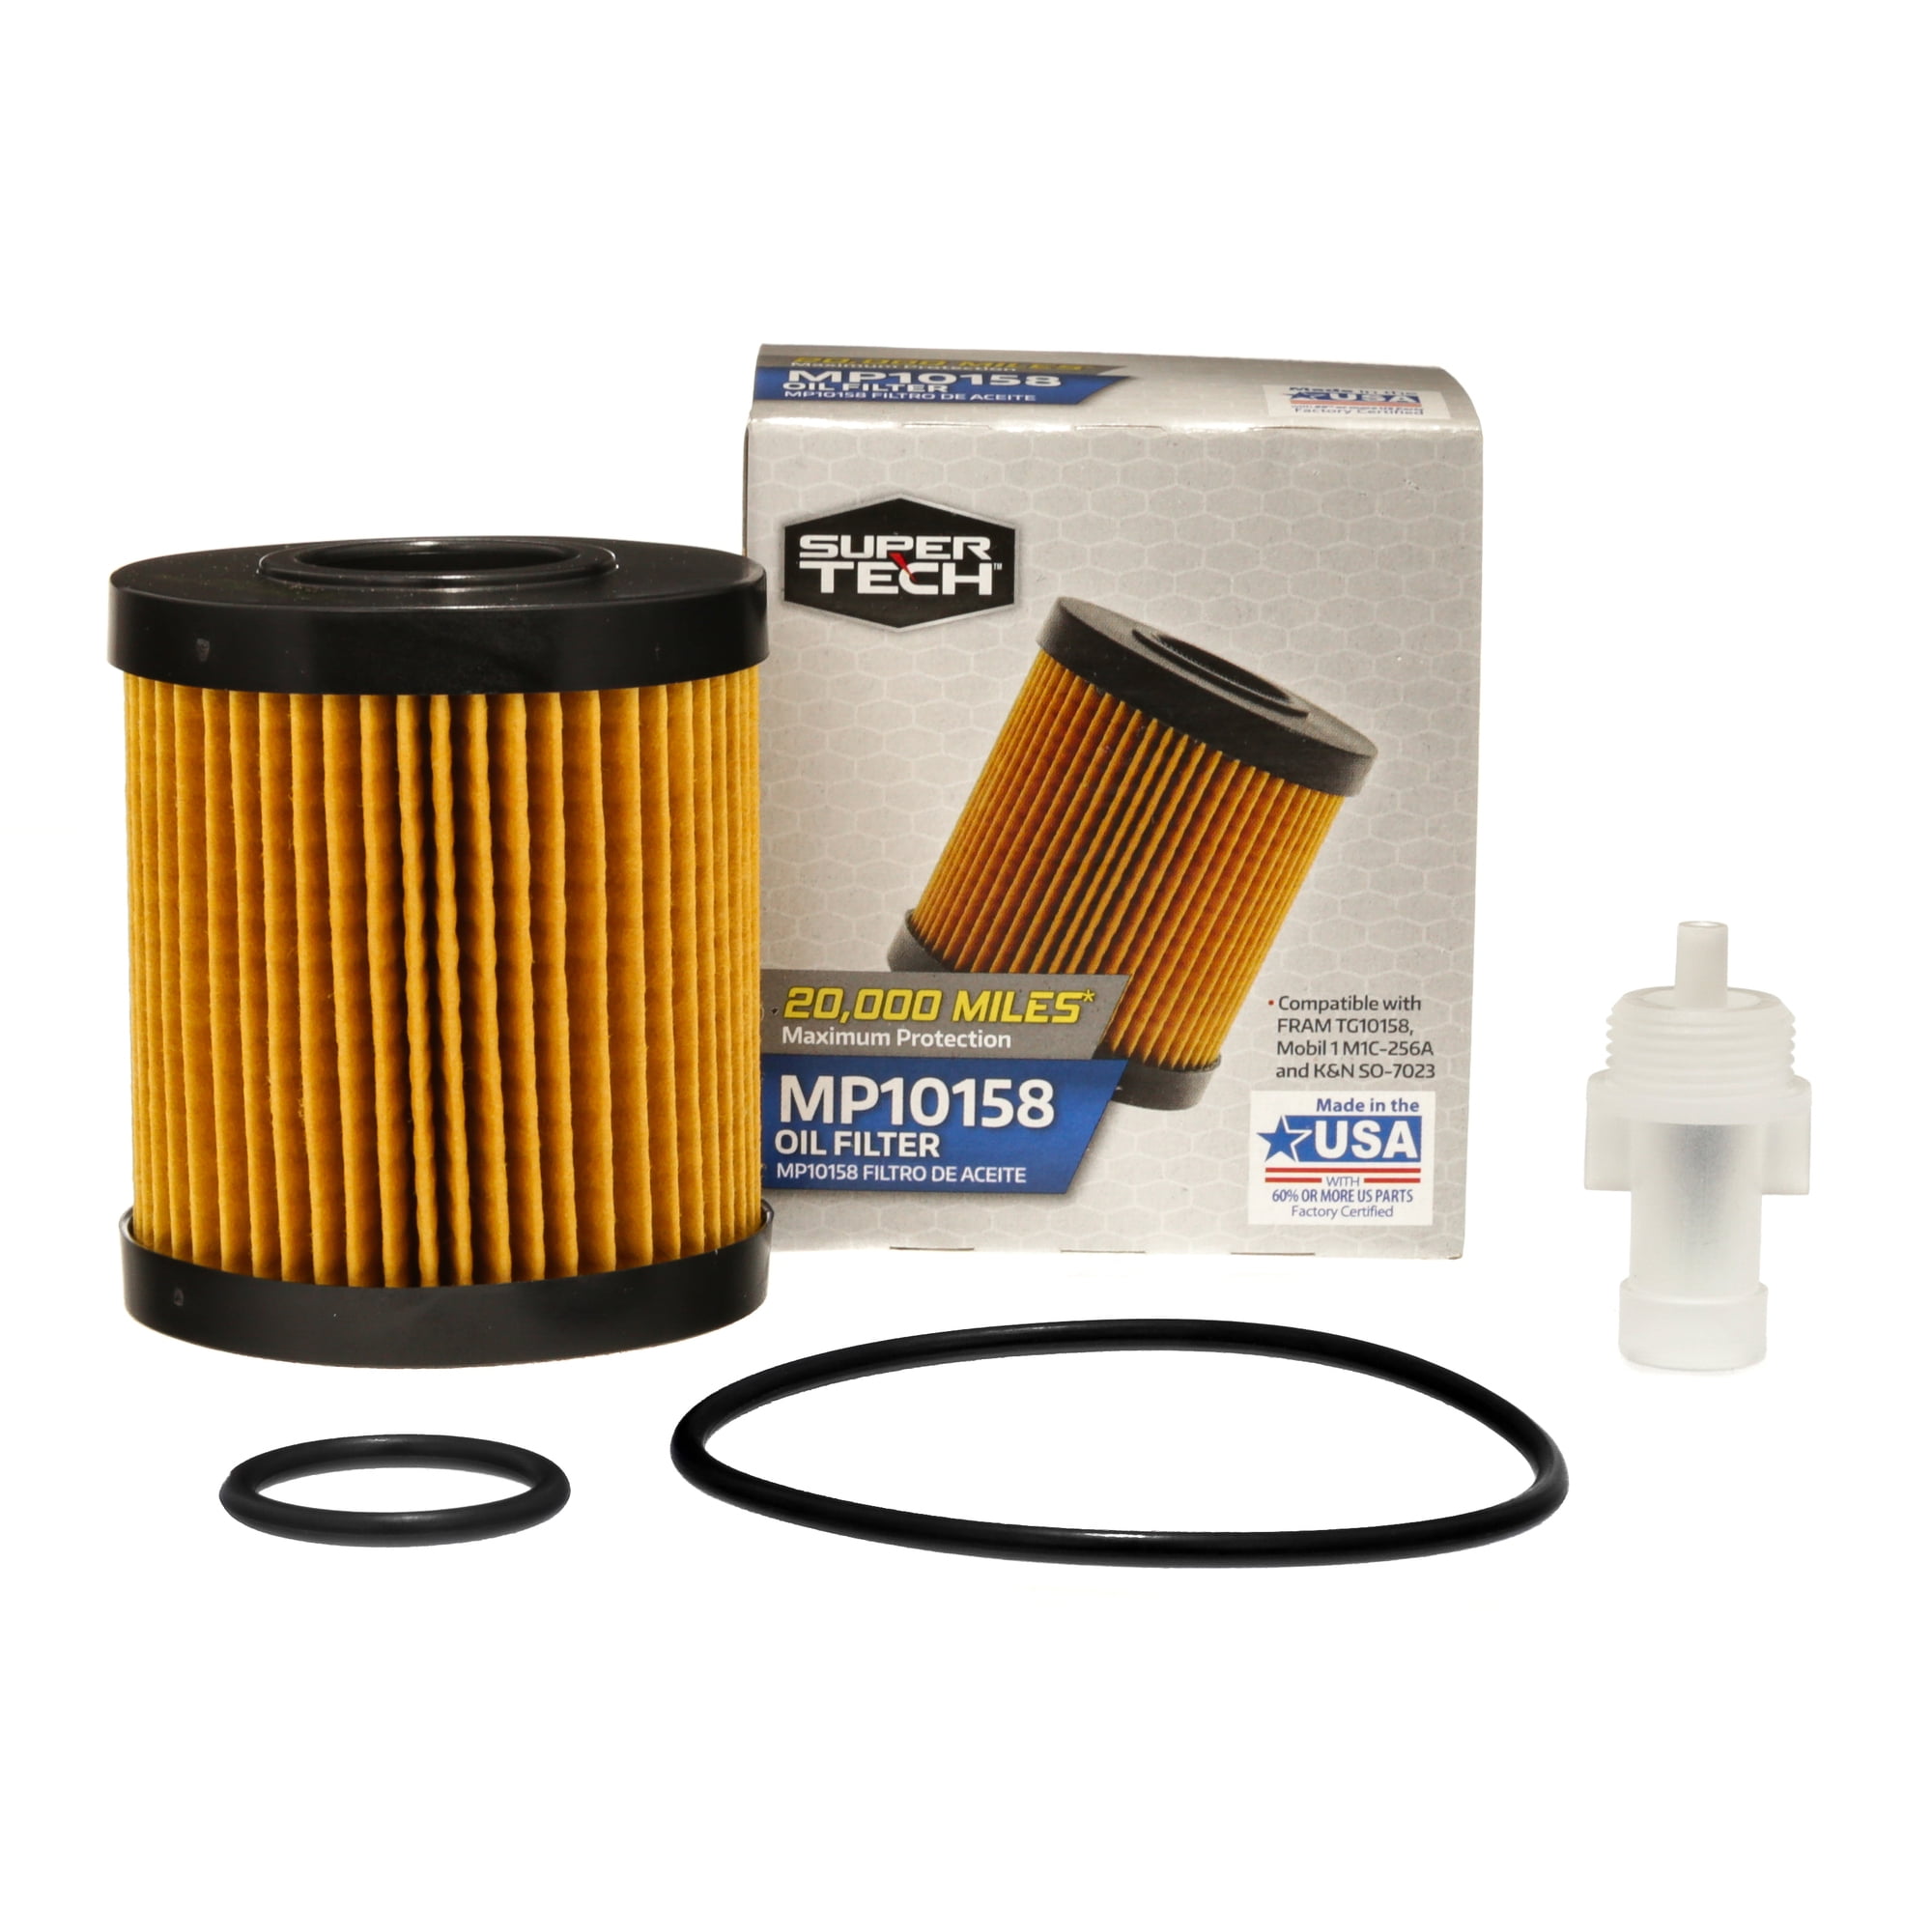 SuperTech Maximum Performance 20,000 mile Replacement Synthetic Oil Filter, MP10158, for Toyota and Lexus